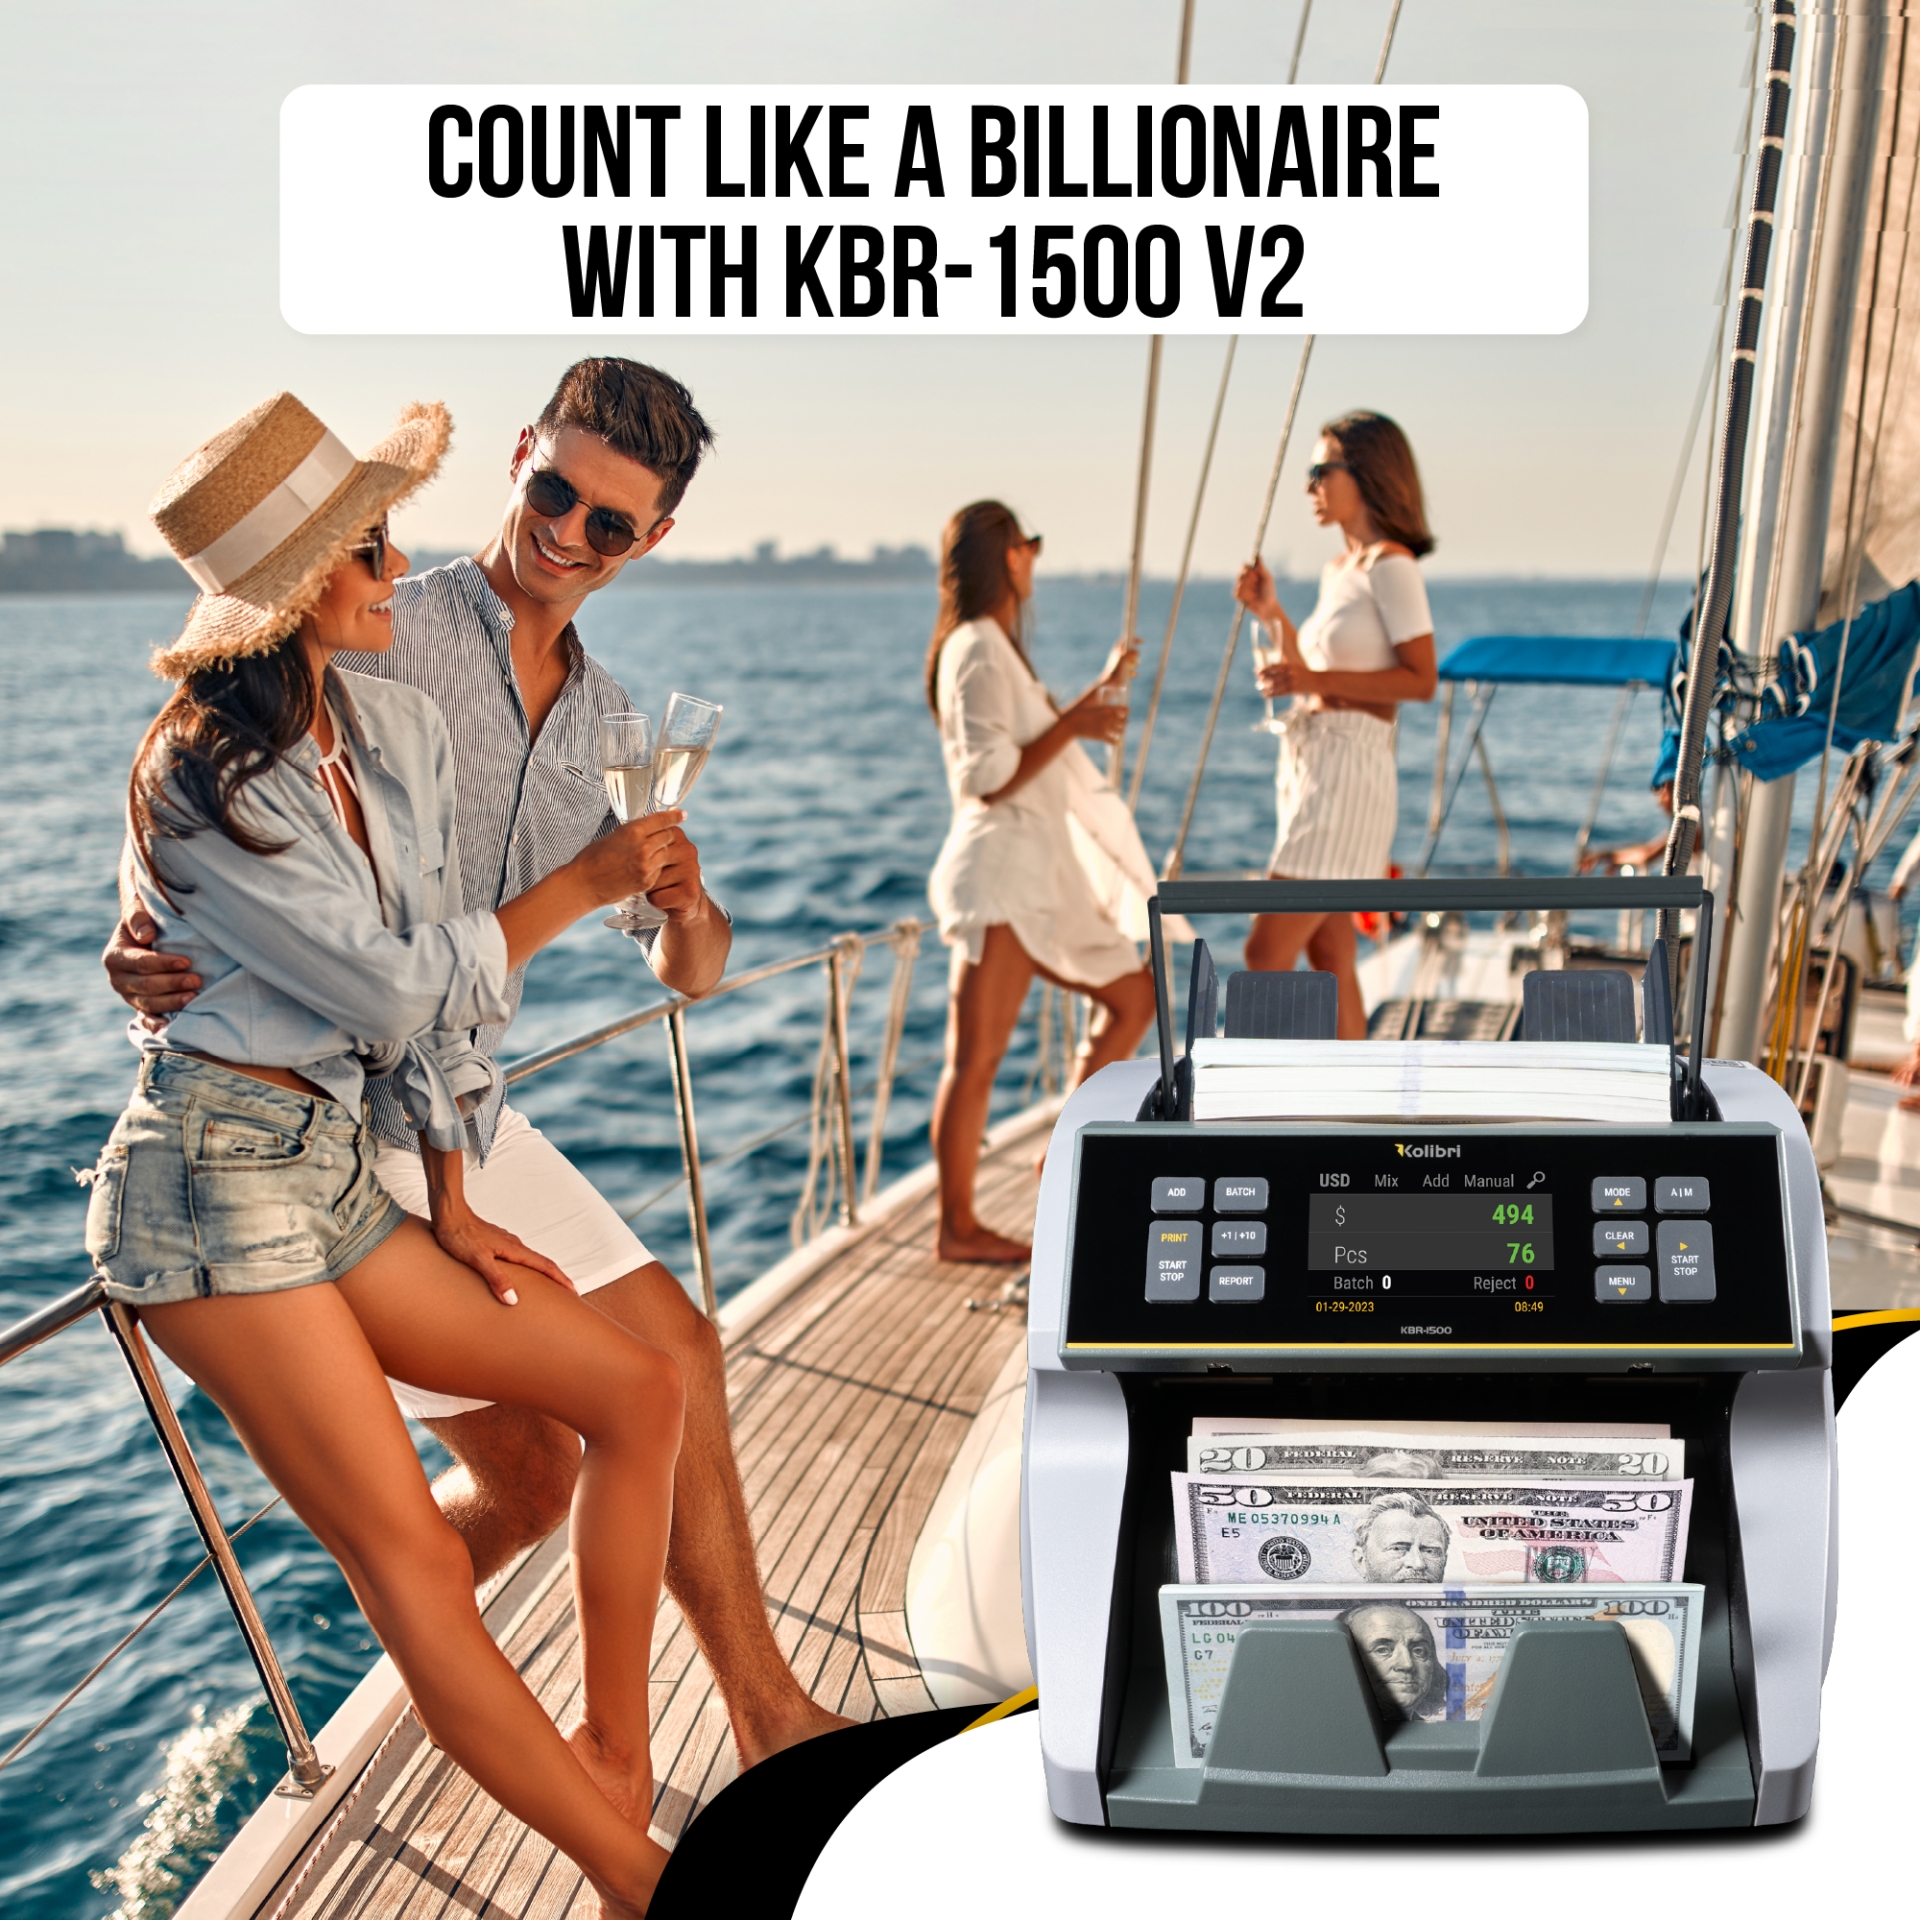 Count Like a Billionaire with KBR-1500 V2